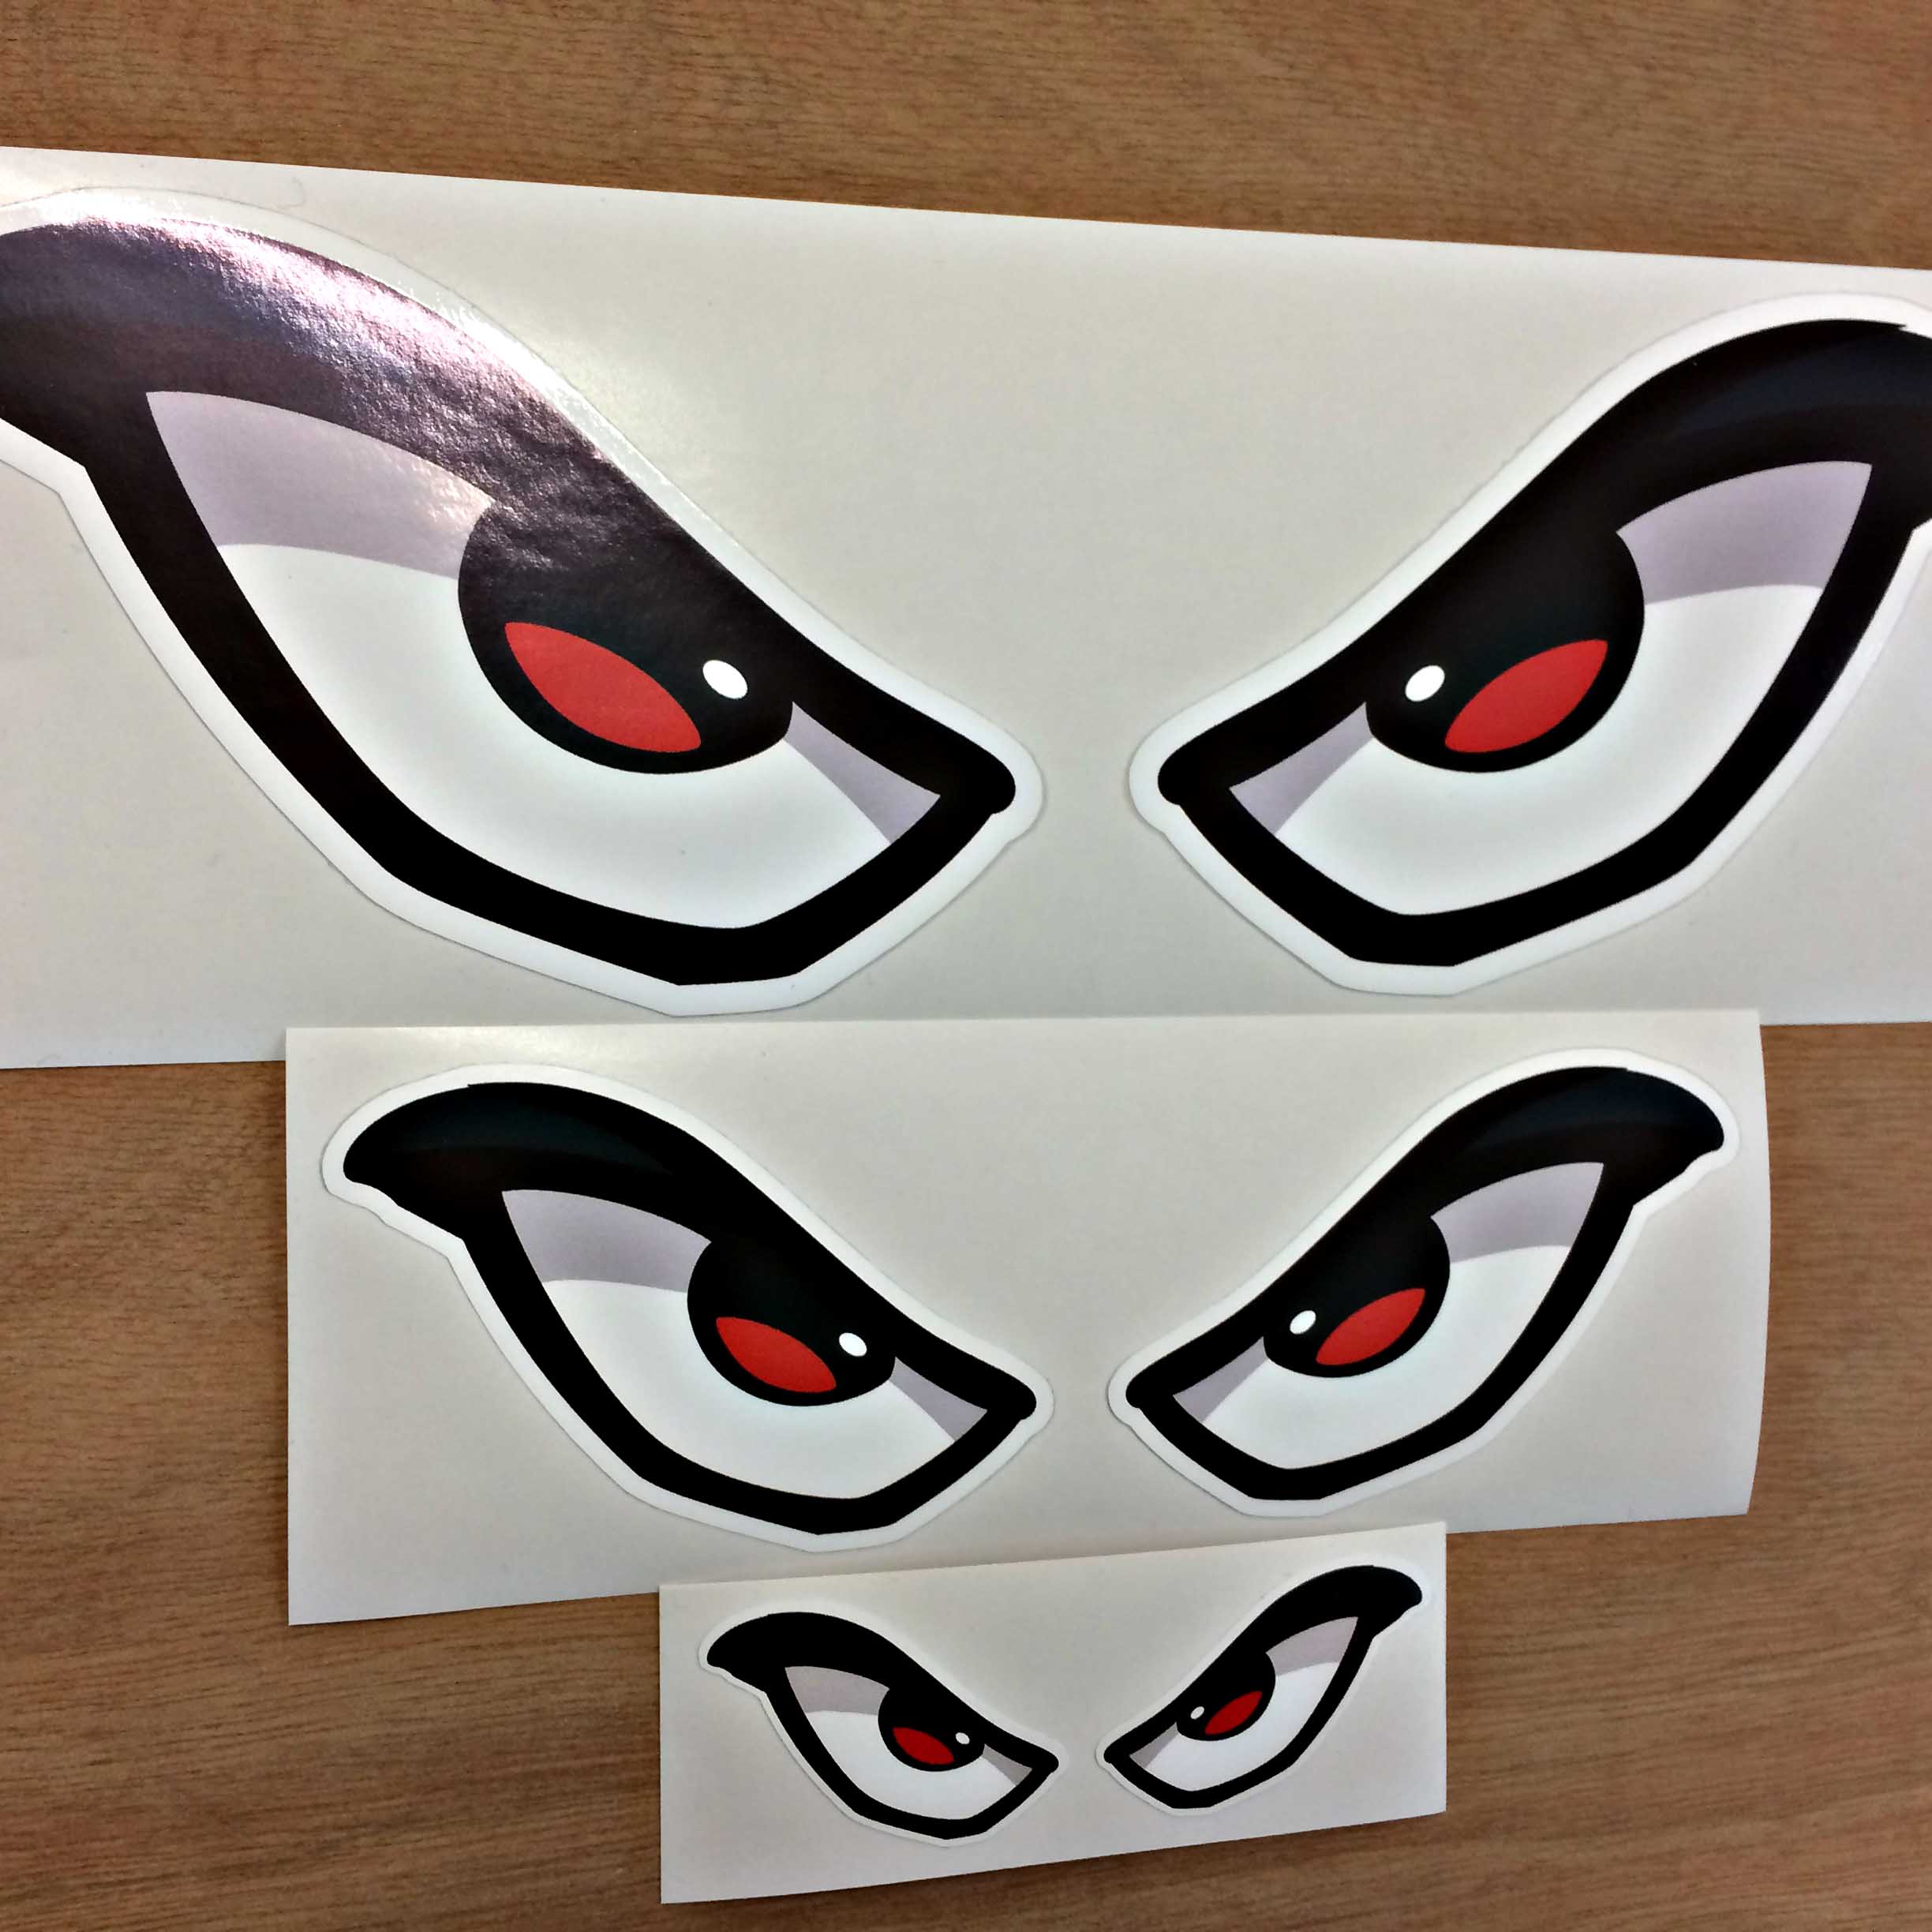 A pair of white evil eyes with red pupils outlined in thick black.